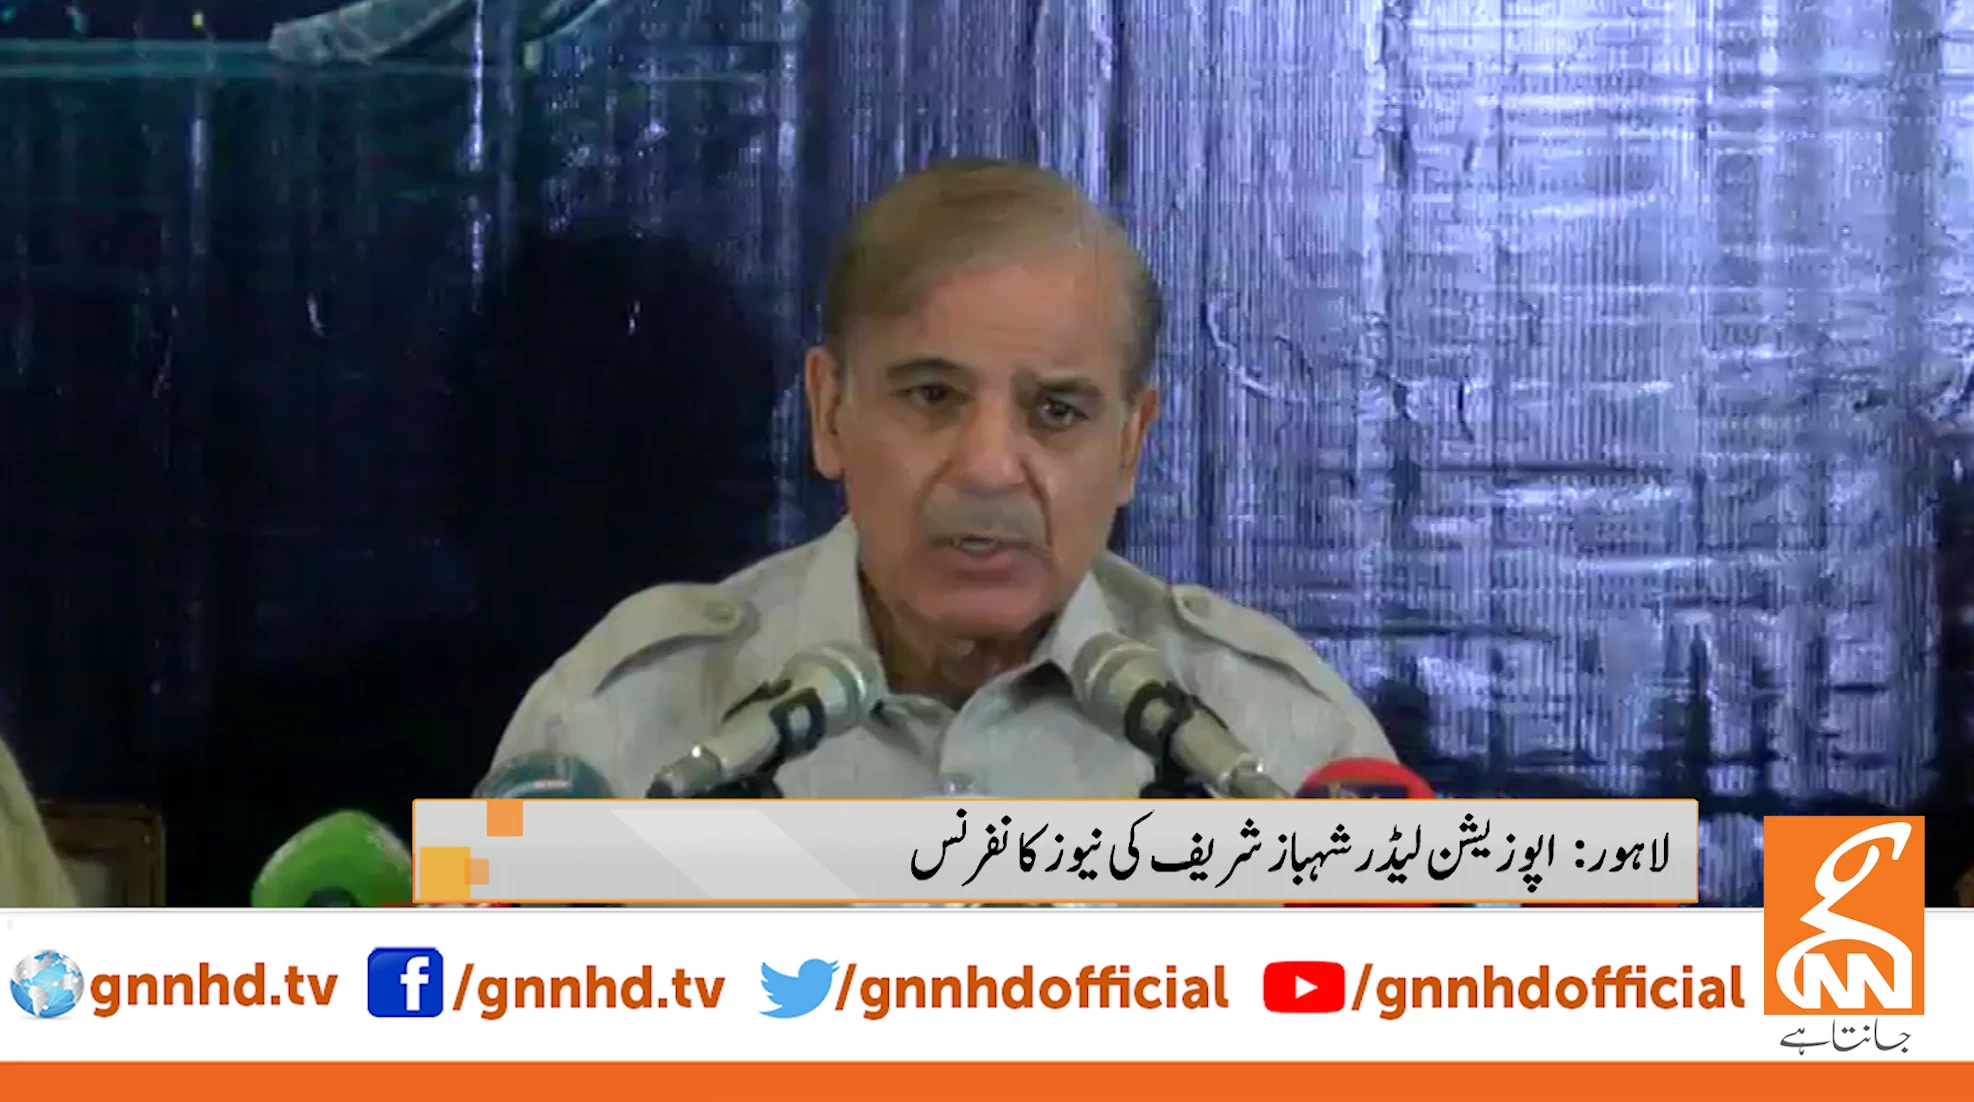 Power outages back in PTI regime despite 'zero-loadshedding' in 2018: Shehbaz